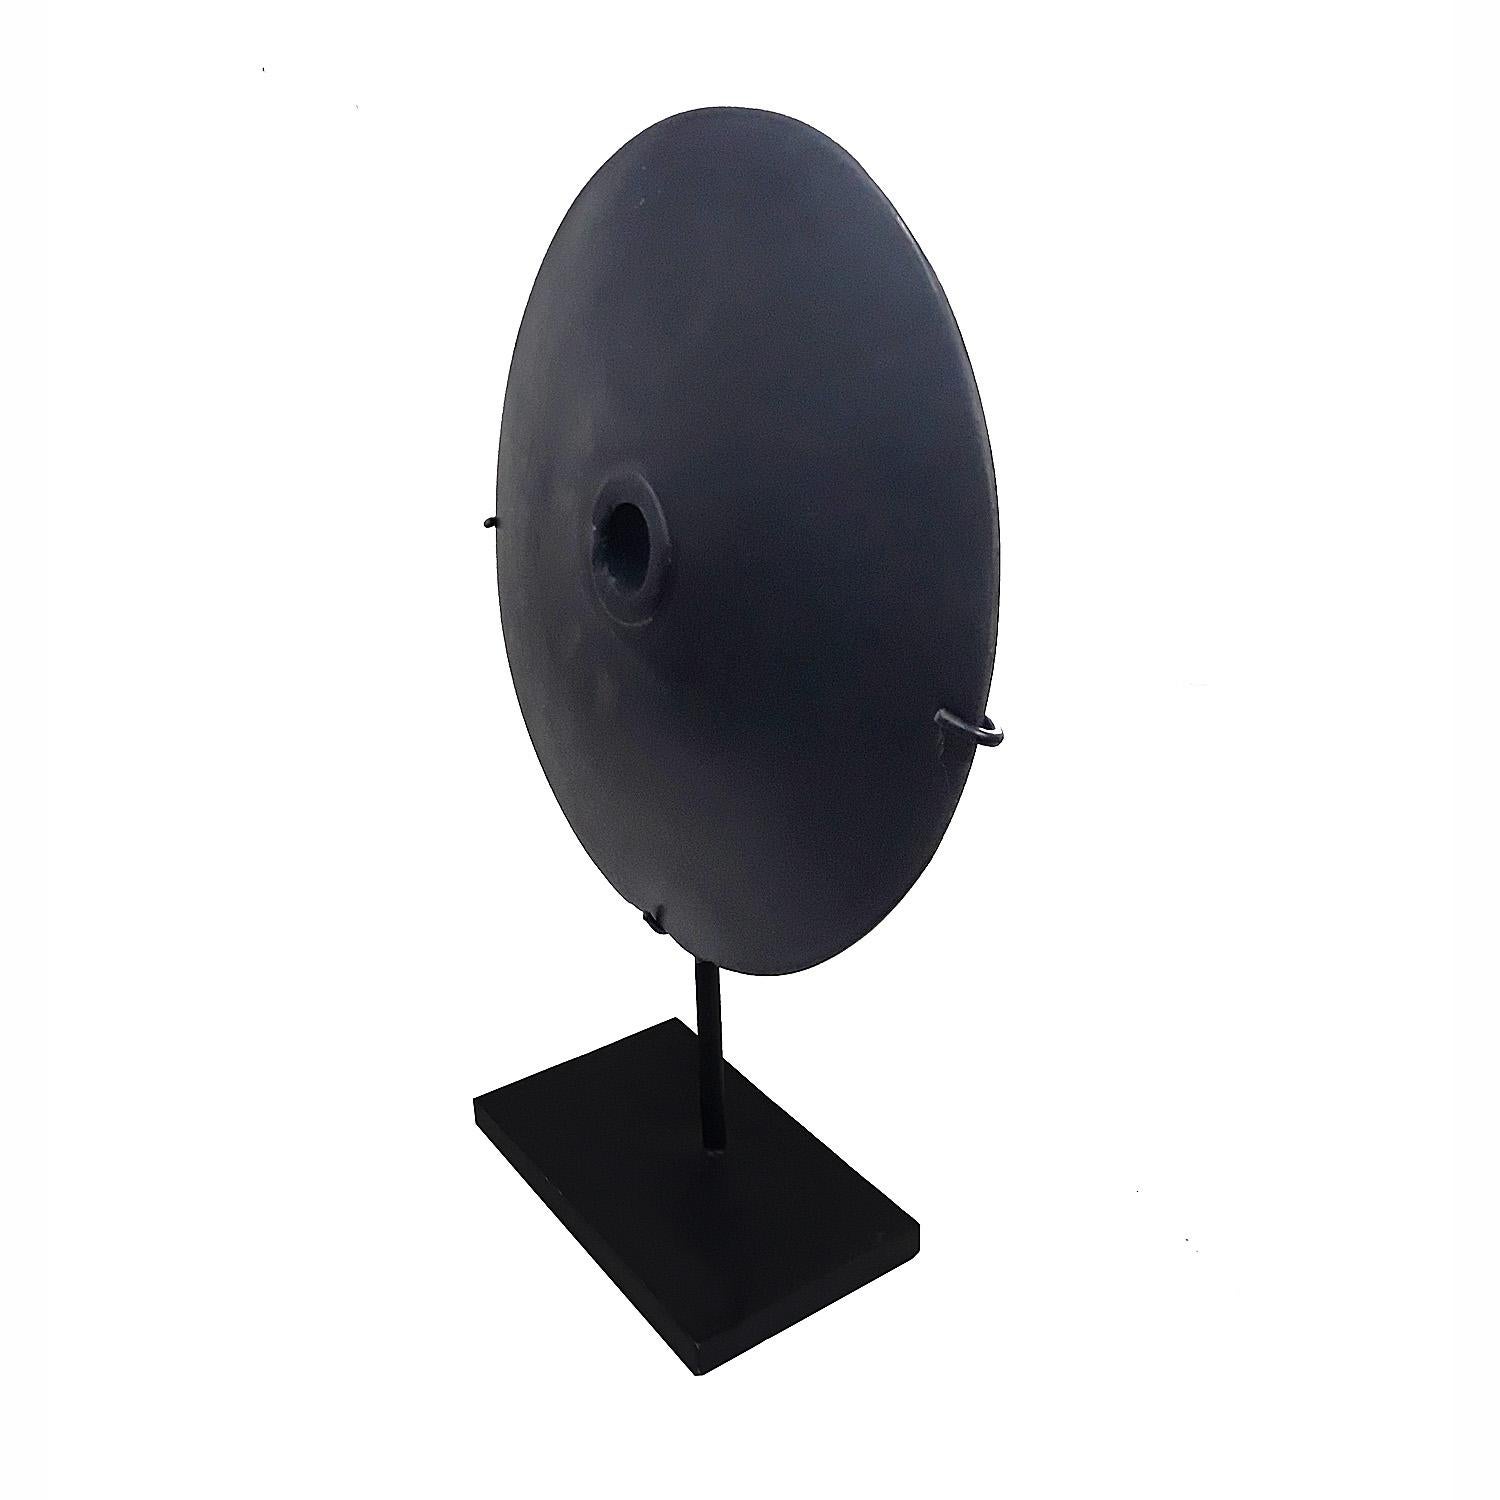 A black stone coin from Indonesia, mounted on a black metal stand. 
14 inches in diameter, 20 inches high. Stand dimensions: 4.5